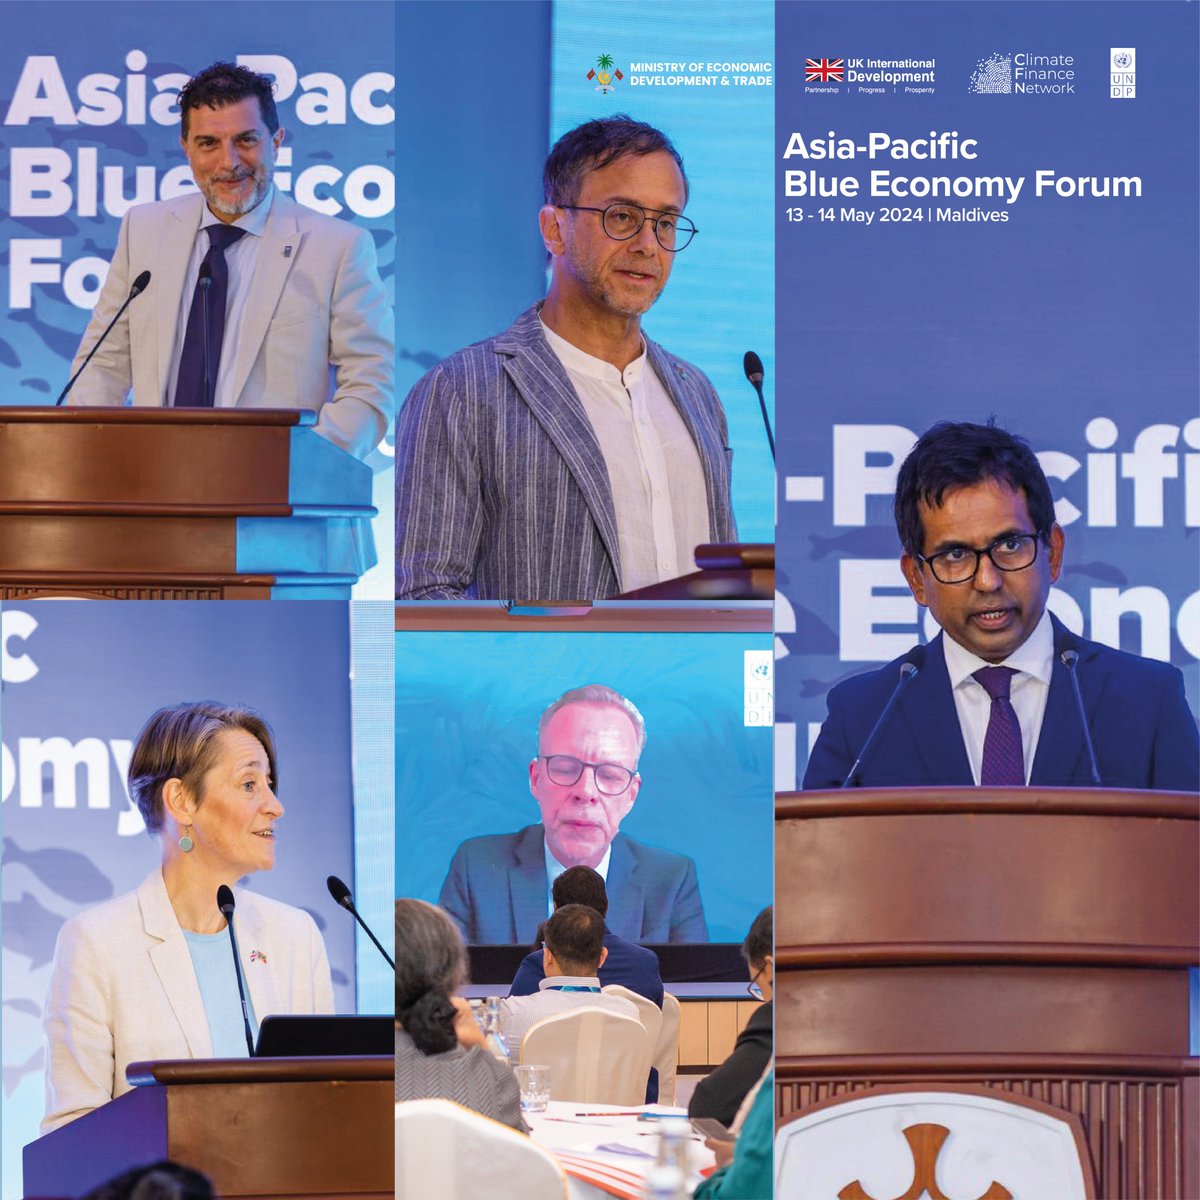 The opening ceremony of the 1st Asia-Pacific Blue Economy Forum being hosted in the Maldives was addressed by @enrico_gaveglia - @UNDPMaldives, @BBusetto - @UNMaldives, @GerdTrogemann - @UNDPasiapac, @caron_rohsler - @UKinMaldives | @FCDOGovUK and @em_saeed - @MoEDmv @CFN_UNDP